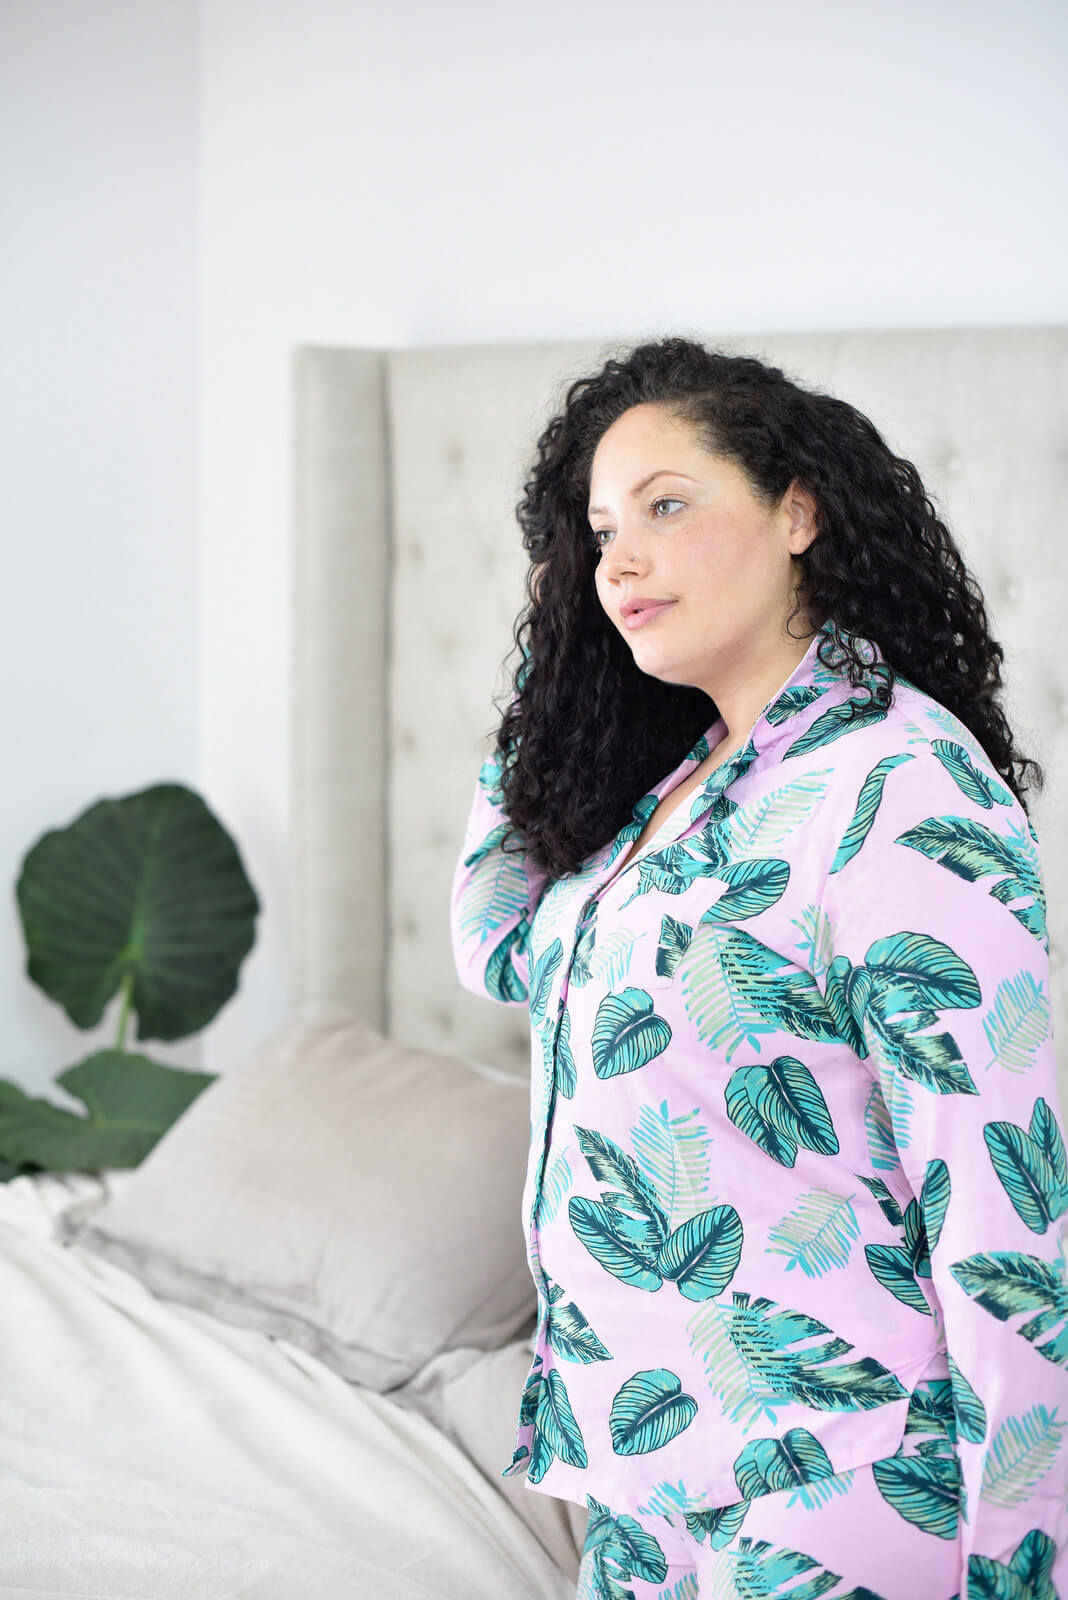 How To Get A Better Night’s Sleep via @GirlWithCurves